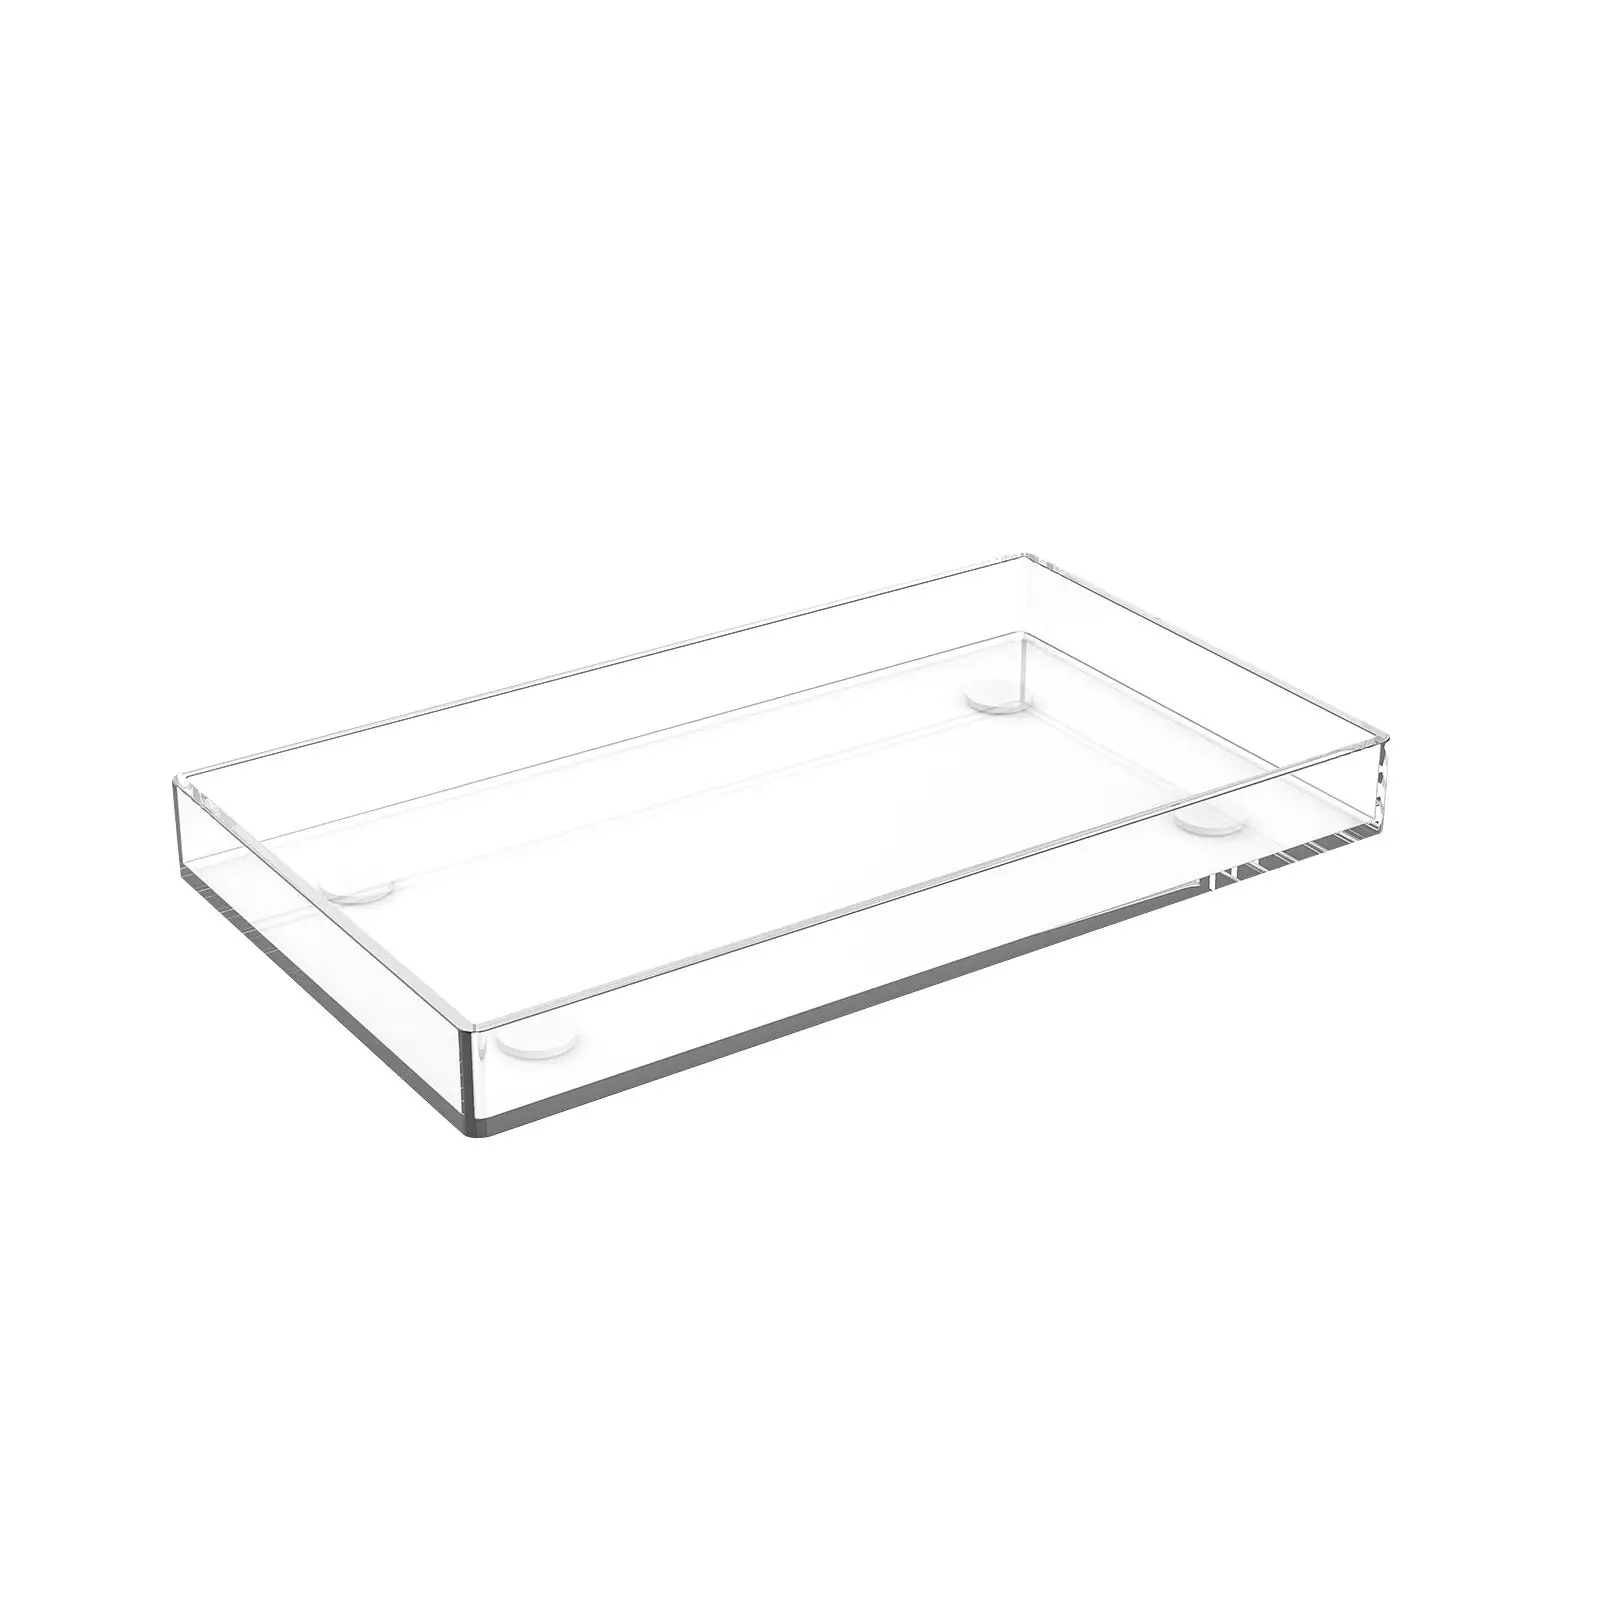 Clear Acrylic Tray Simple Modern Storage Tray Large Acrylic Tray for Towels Cosmetics and Accessories Household Bedside Office